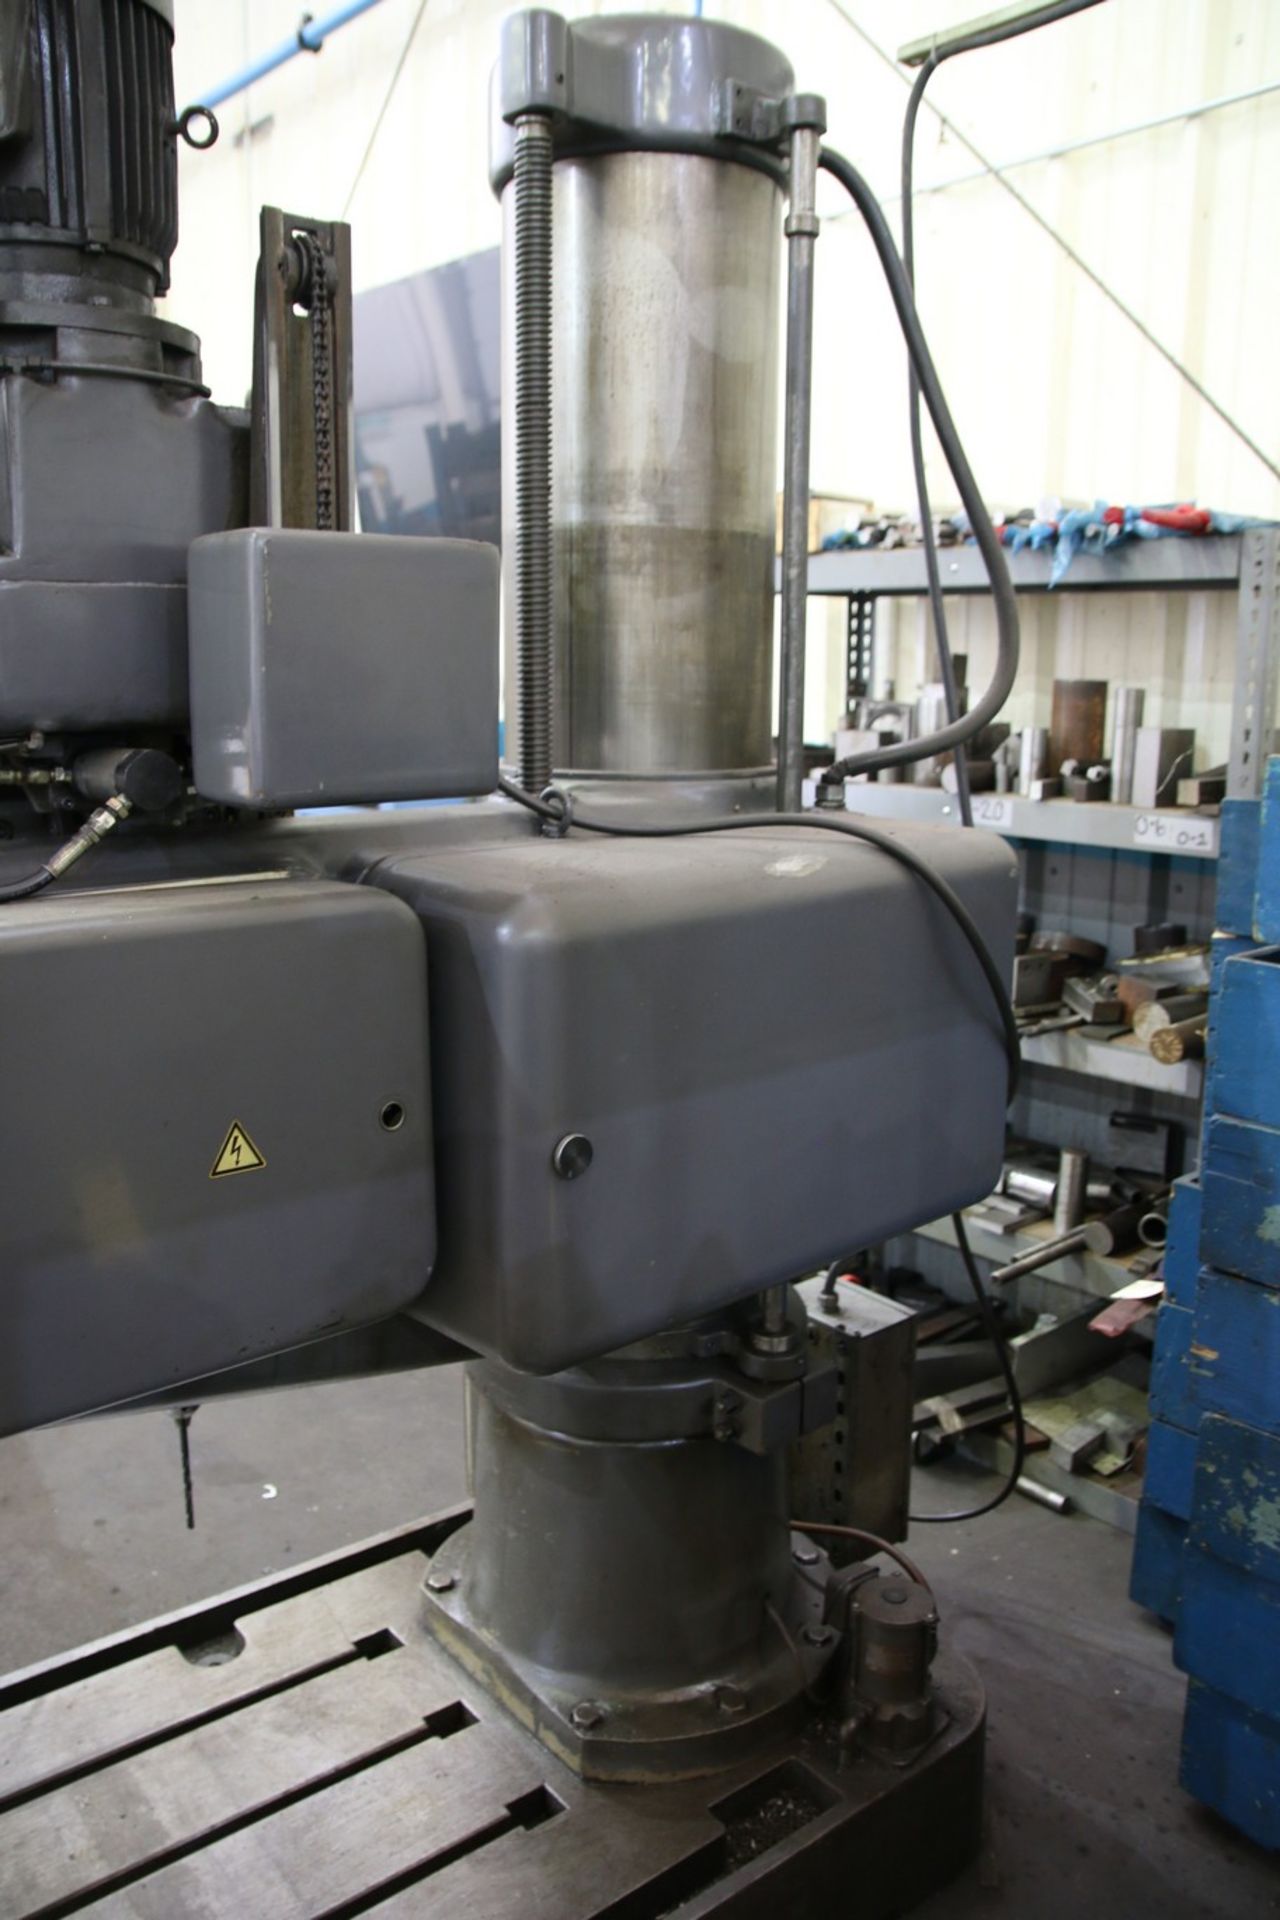 Ikeda RM-1575 Ikeda RM-1575 Radial Drilling Machine Includes T-Slot Box Table - Image 5 of 10